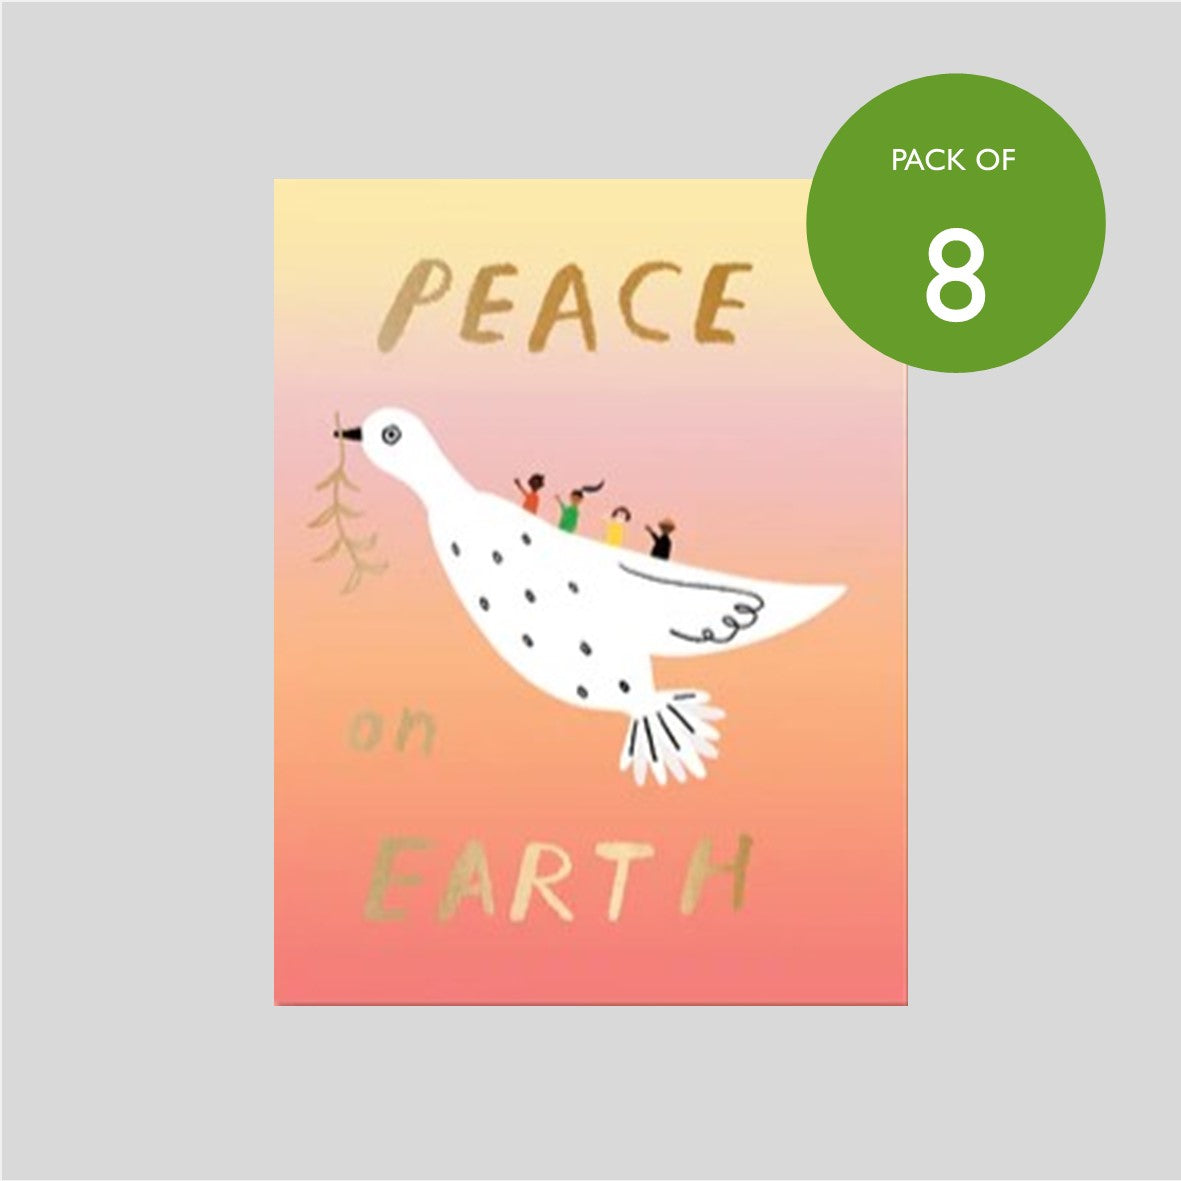 Pack of Eight Christmas Cards - Peace on Earth